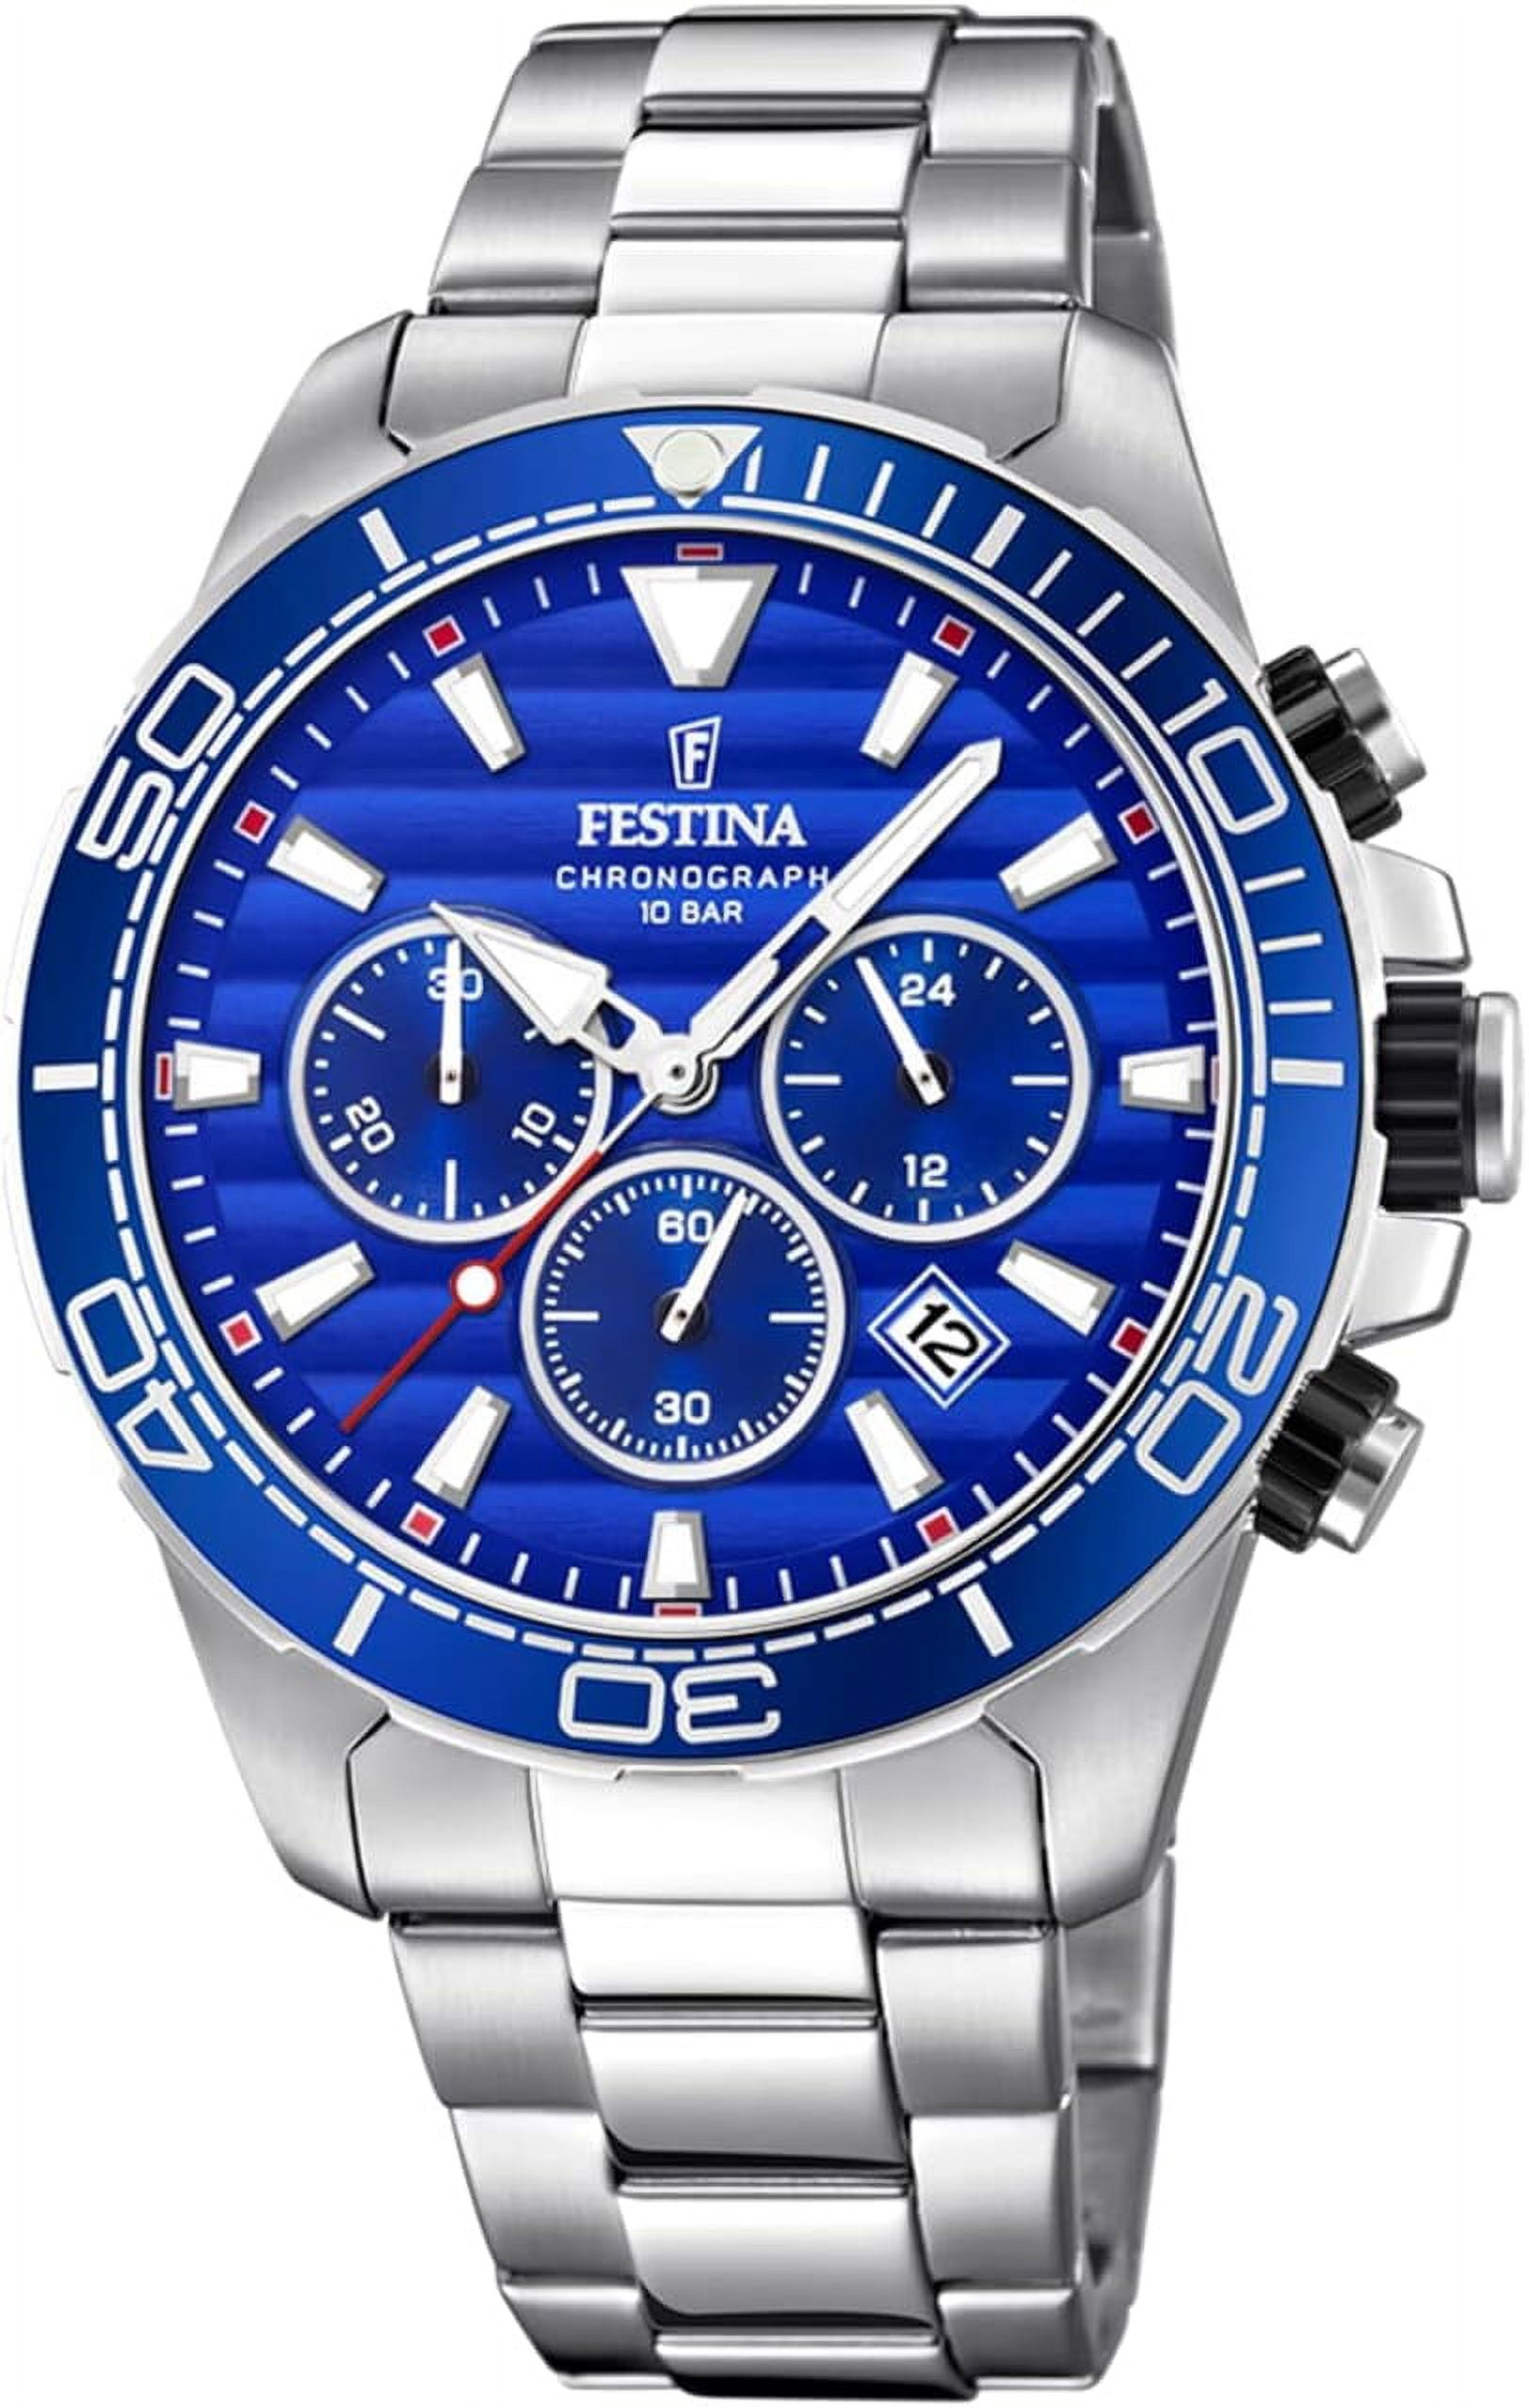 Men's Watch Festina - F - Chronograph - Quartz - Date - AM/PM - Steel and  Blue - Stainless-Steel Strap 